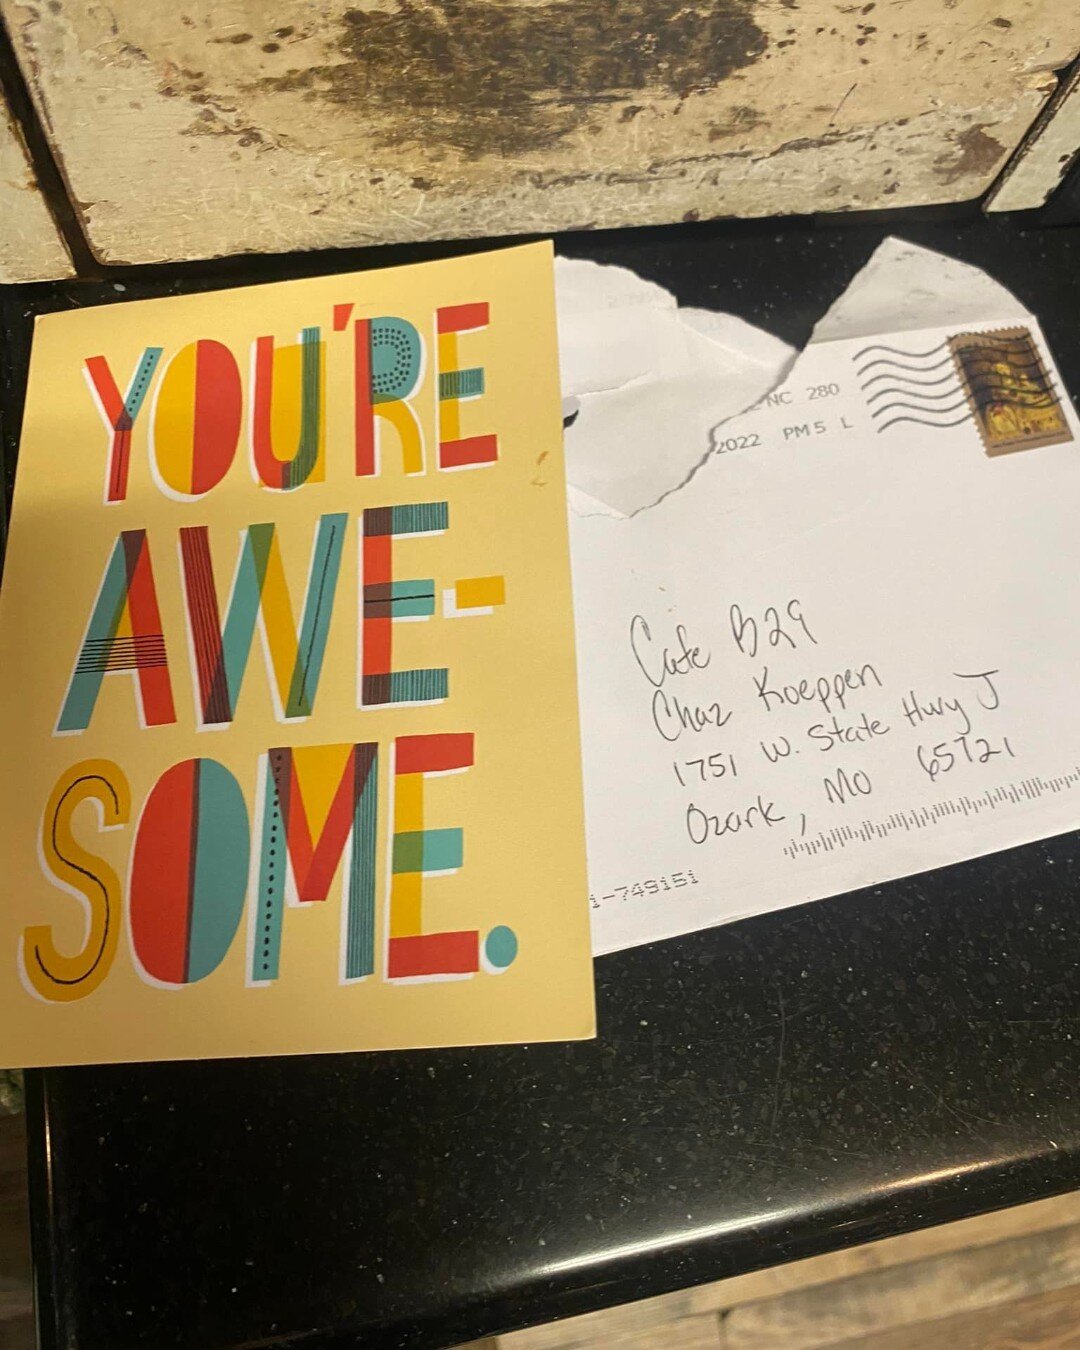 I realized I forgot to share this on IG from back in January. It never ceases to amaze me how many many people appreciate our Veterans and military. I got the sweetest card today from a John Gerring from North Carolina. He has seen the caf&eacute; on